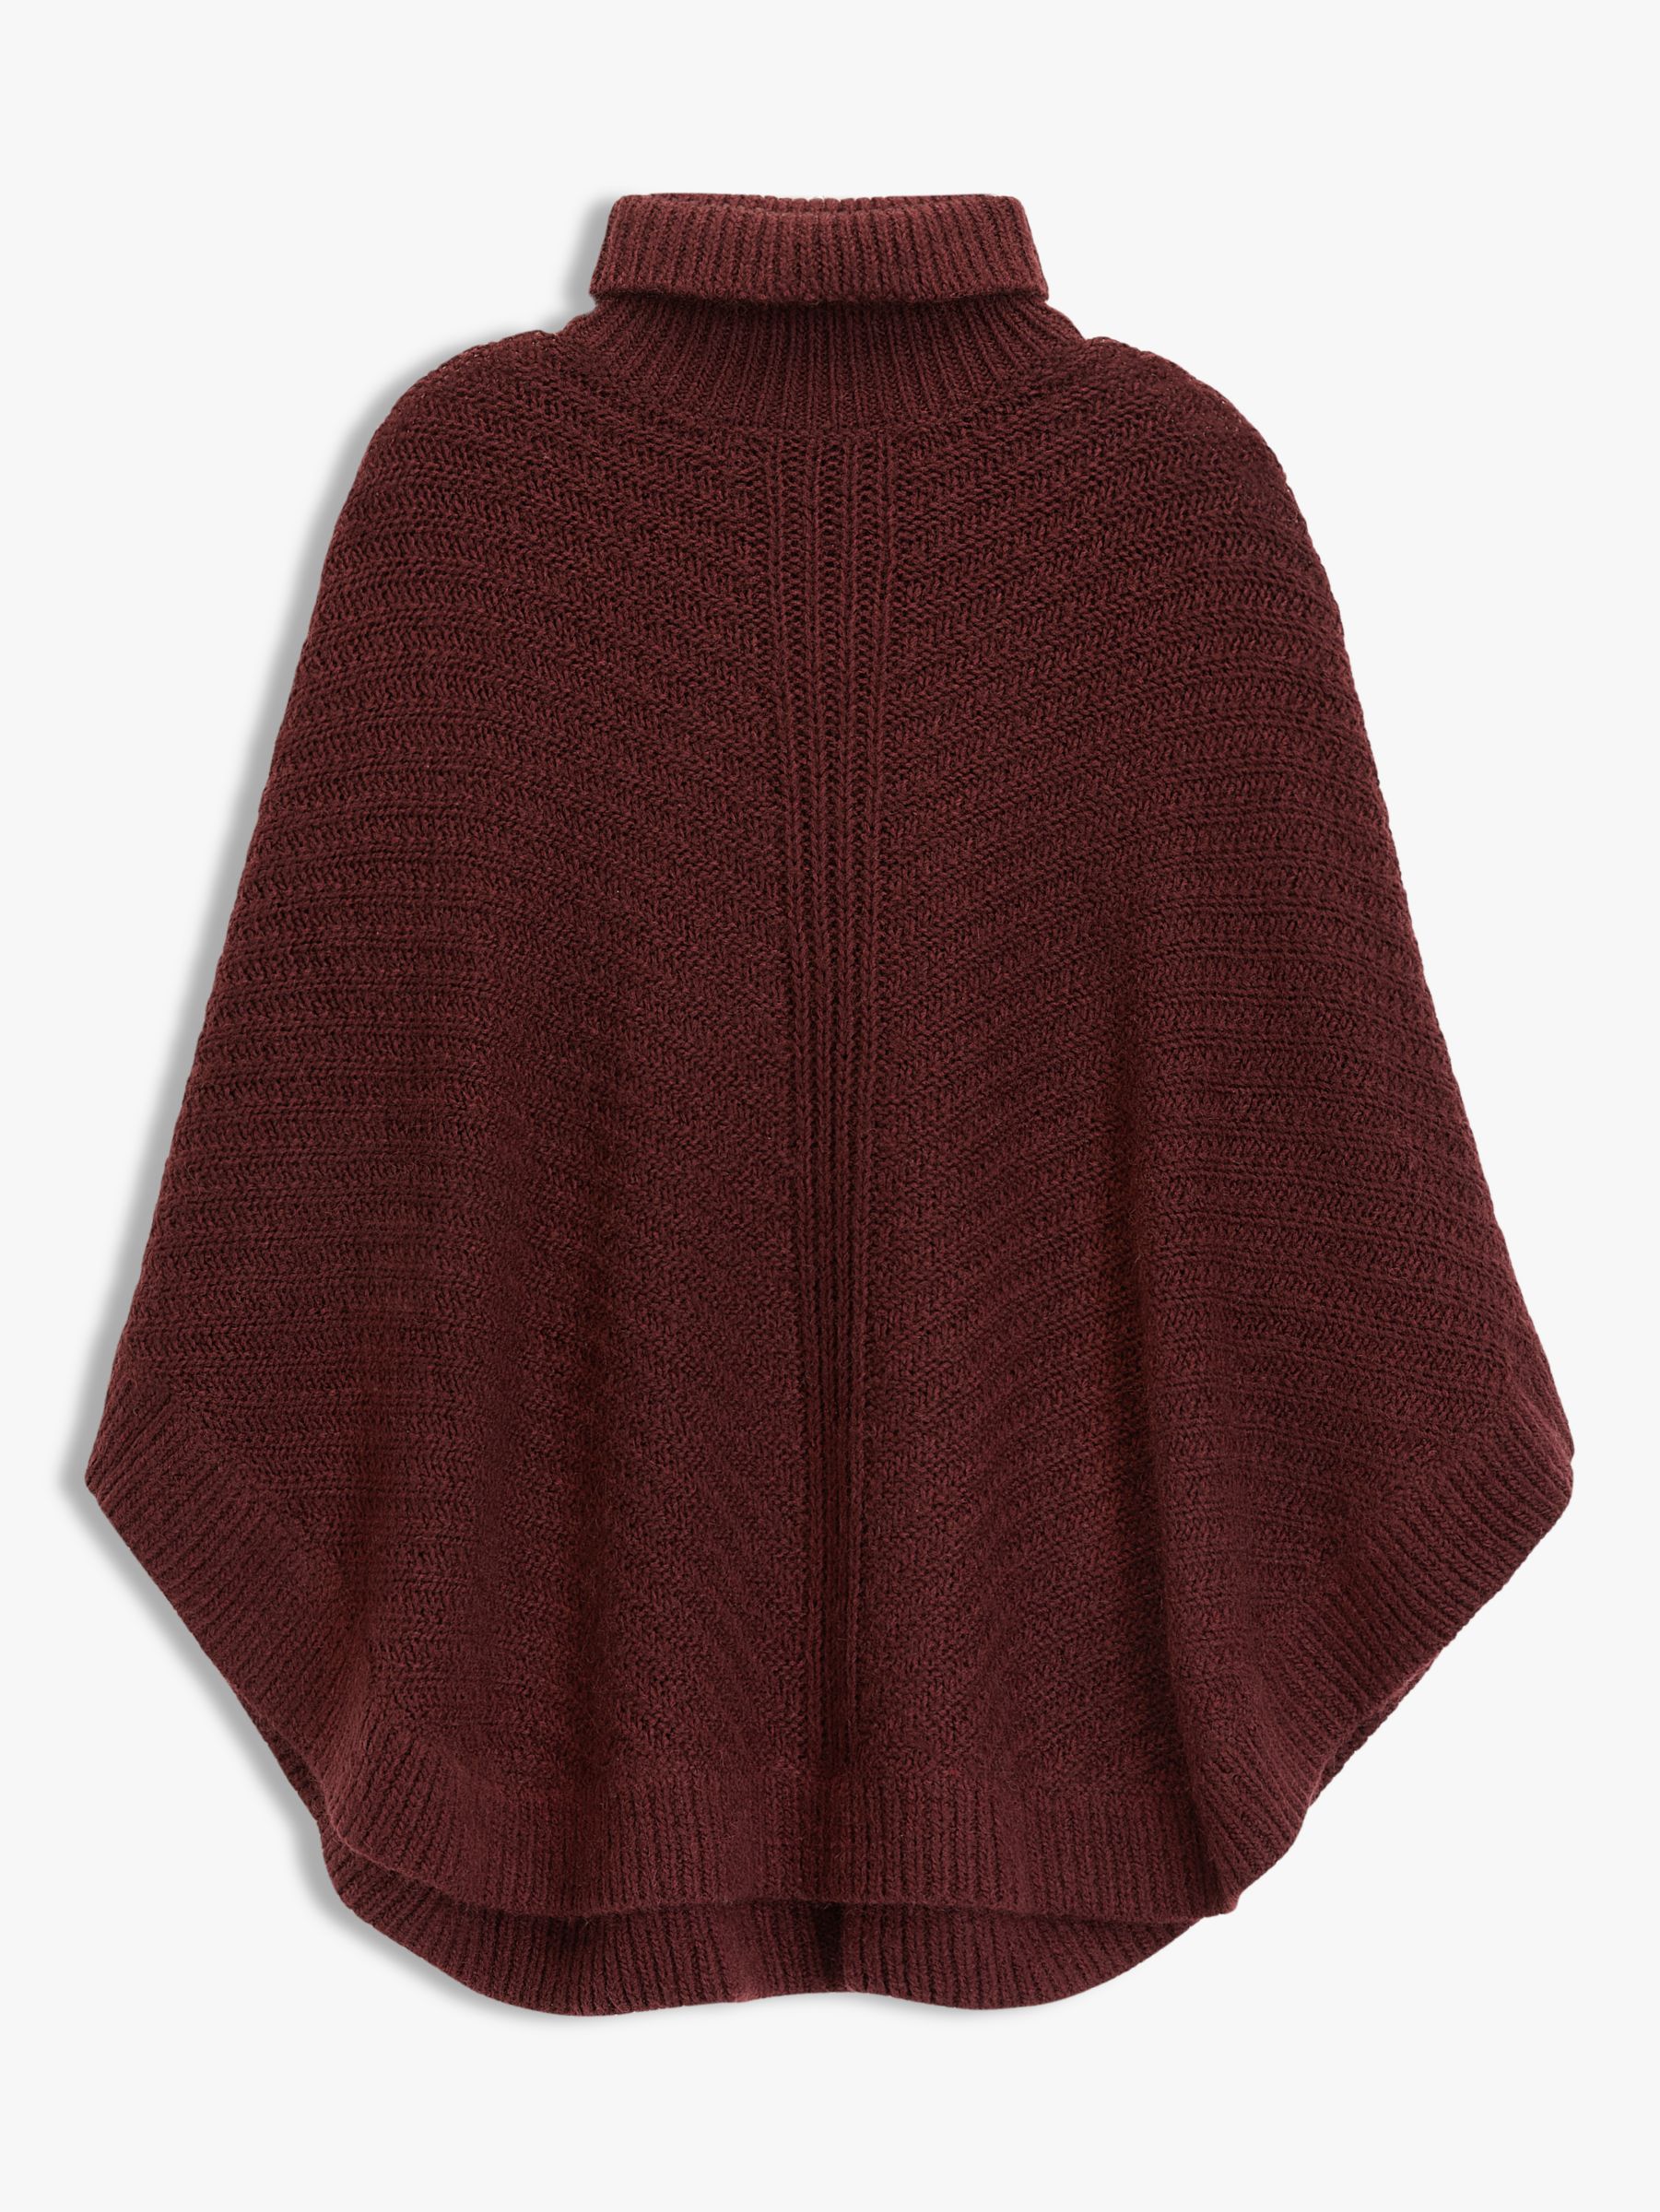 AND/OR Phoebe Textured Knit Poncho